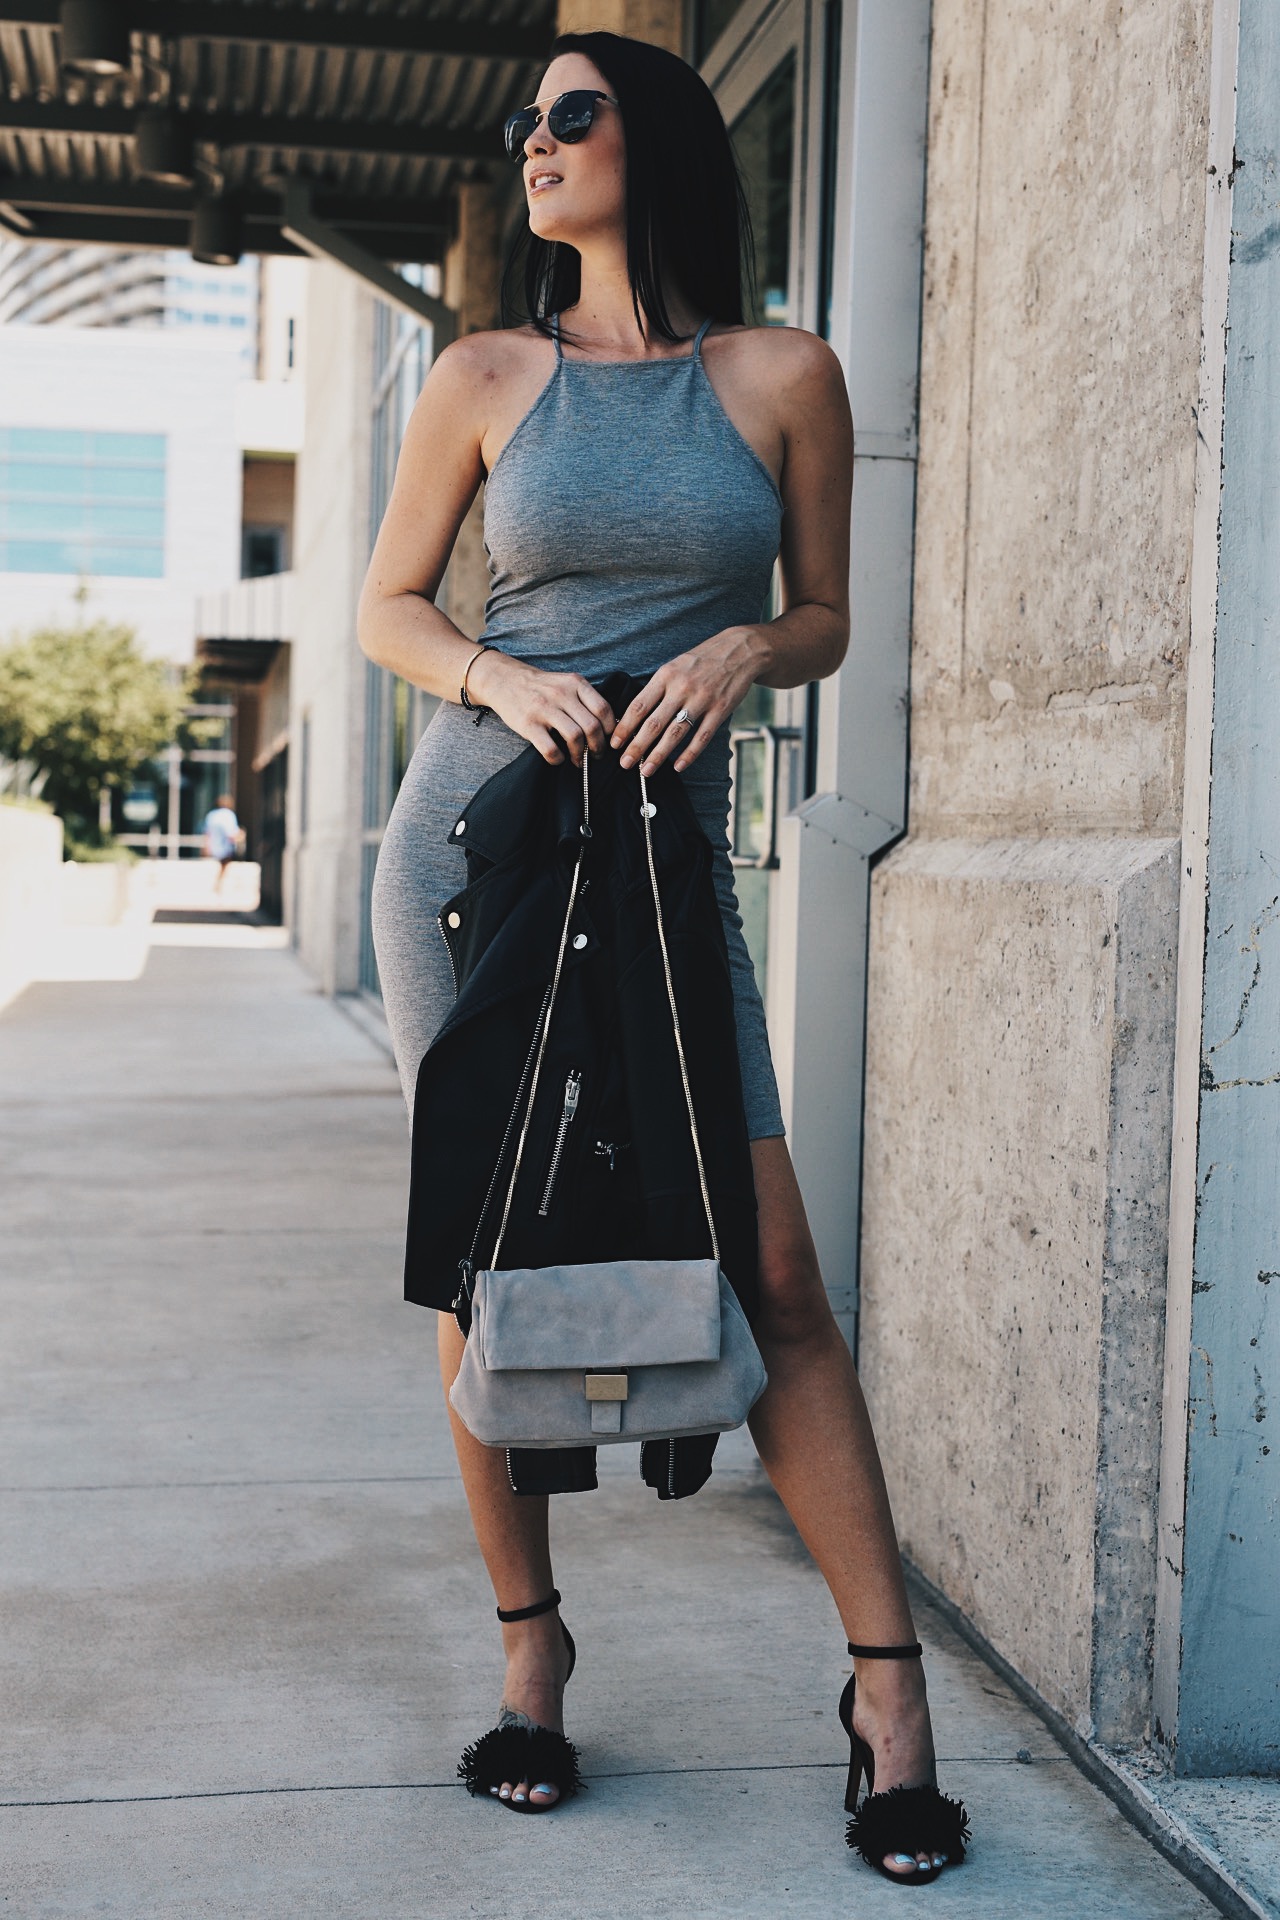 Austin Blogger DTKAustin shares THE perfect grey summer dress from & Other Stories and how to easily transition the look into Fall with a faux leather jacket. | how to style a halterneck strap dress | how to wear a halterneck strap dress | summer to fall fashion pieces | summer to fall wardrobe | summer fashion tips | summer outfit ideas | summer style tips | what to wear for summer | warm weather fashion | fashion for summer | style for summer || Dressed to Kill